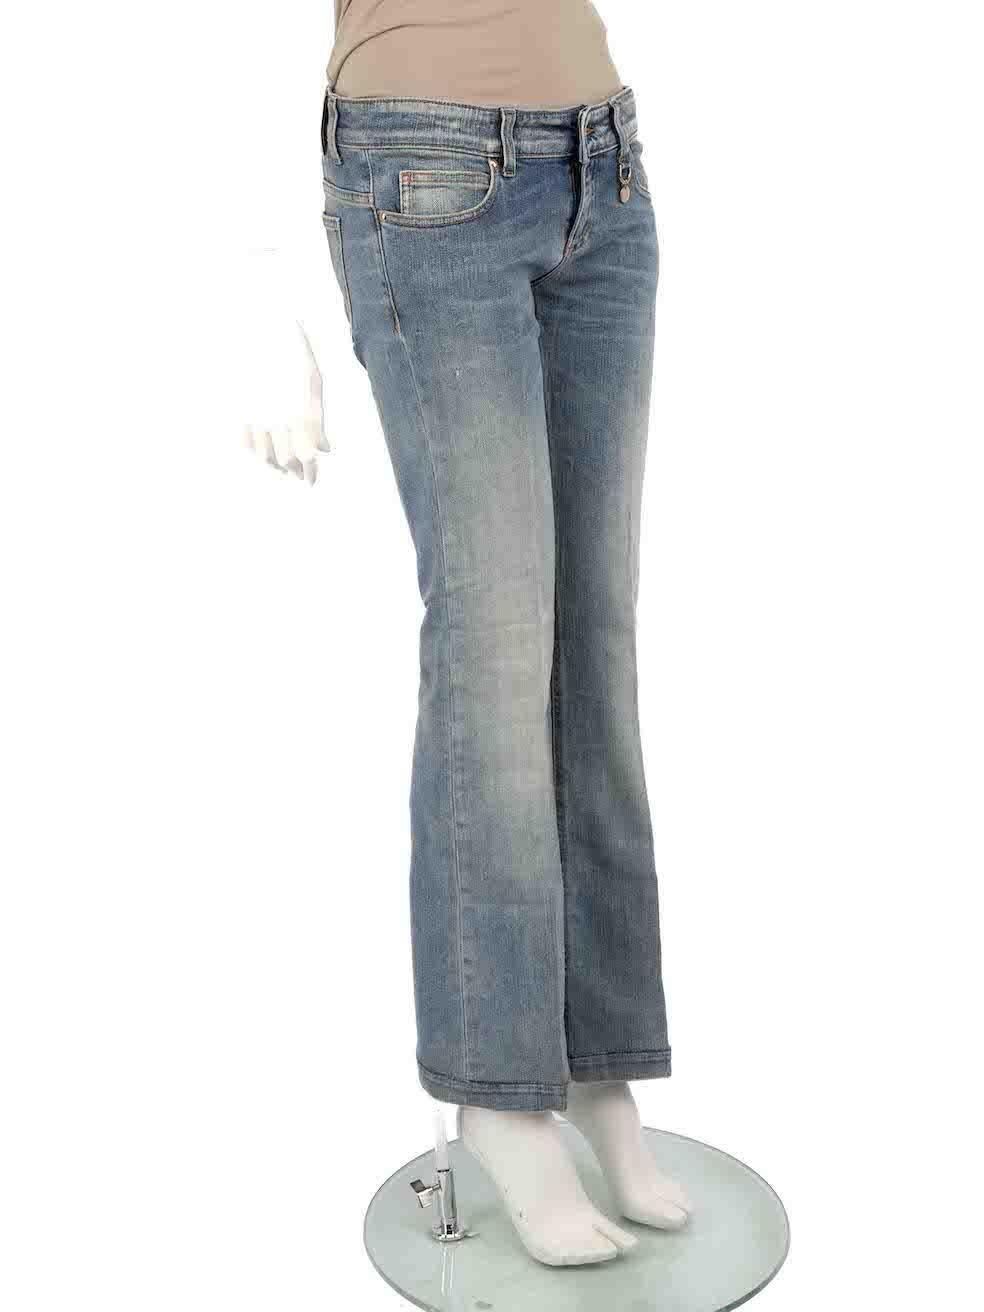 CONDITION is Very good. Minimal wear to jeans is evident. Minimal wear to front right leg with a small rip to fabric on this used Gucci designer resale item.
 
 
 
 Details
 
 
 Blue
 
 Cotton- elastane
 
 Straight leg jeans
 
 Low rise
 
 Stone